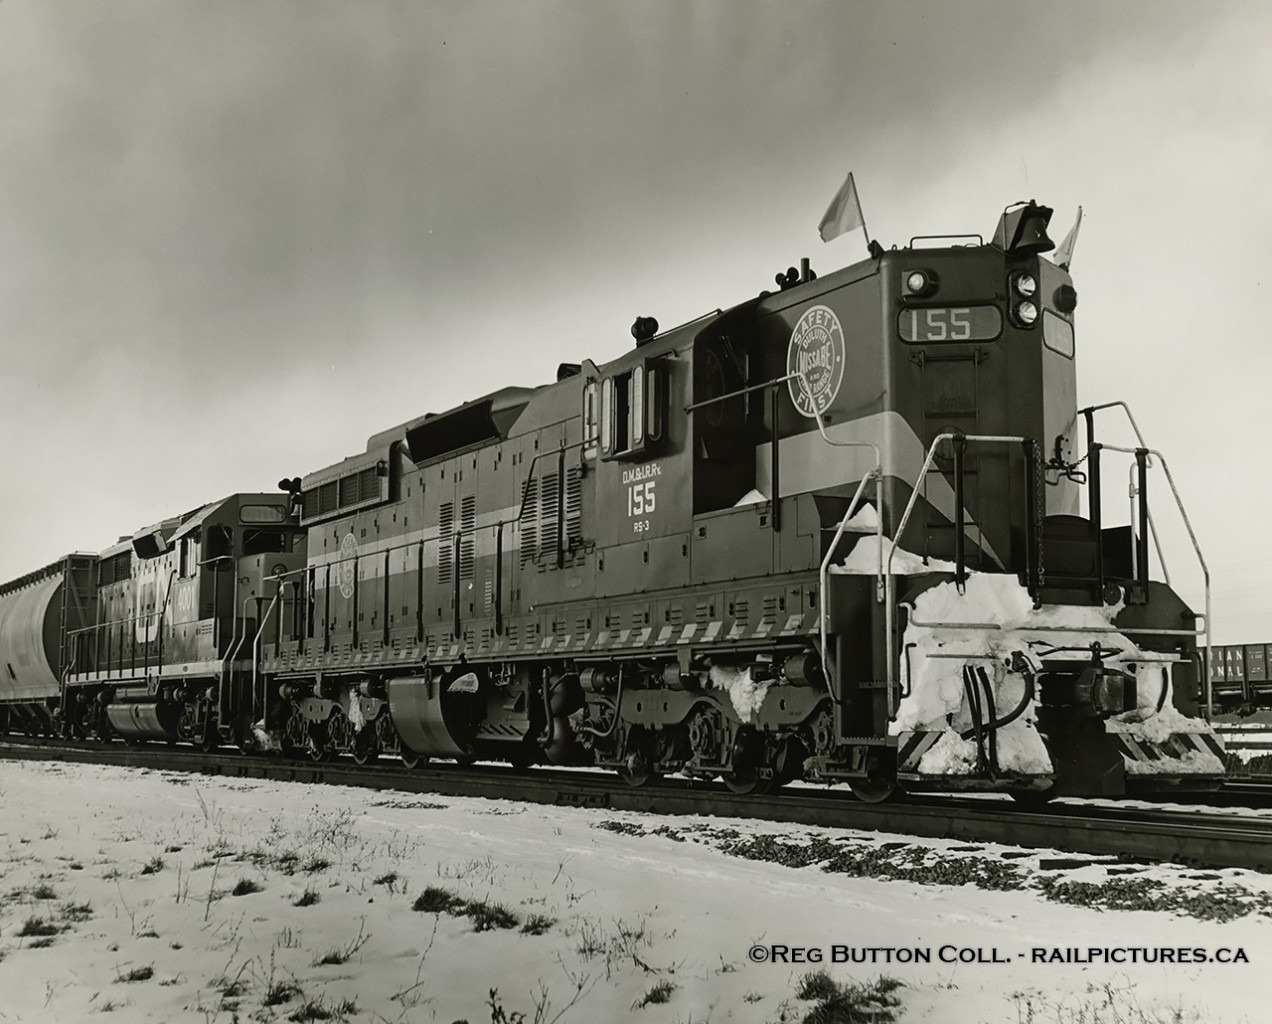 Extra flags flying high, DM&IR SD9 155 leads CN GP35 4001 eastbound through Merriton on Saturday, January 15, 1966.  From the winter of 1963/64 through winter 1973/74 DM&IR SD9 and SD18 units were often leased by CN, CP and a few other lines.  The winter of 1965/66 saw CN leasing 20 units, 155 being one of them (the only time it was leased), and the CP leasing 16.DMIR 155 was one of 73 SD9s built by EMD and delivered in March, 1958.  The unit would later be sold to Independent Locomotive Service in 1993 and rebuilt/renumbered as ILSX 1374.  It's last known operation was the Dakota Quality Grain Cooperative in Ross, North Dakota about 2009.  Trailing unit, CN 4001, was the second of two GP35s built for CN (the other being CN 4000).  Both units would be renumbered 9300/9301 respectively in 1981, and retired from CN's roster in 1984.  9301 would be stripped of usable parts and scrapped at Mandak Metals, while 9300 would be sold to the Dakota, Missouri Valley & Western (DMVW) in 1989 as their 323, eventually being scrapped in 2002.More DMIR on CN:Roger Lalonde: Jan. 18, 1965 at Montreal.Bill Thomson: March, 1966 at Halwest.Doug Hately: Dec. 27, 1965 at Bowmanville.CN GP35s:CN 4000 by Bill Thomson: Mimico, Oct. 1964CN 4001 by Bill Thomson: Mimico, Oct. 1964CN 9300 by Doug Lawson: Dead and drained at Edmonton, Feb. 1984CN 9301 by Doug Lawson: Dead and drained at Edmonton, Feb. 1984Thanks to Bruce Mercer and Doug Wingfield for further information.